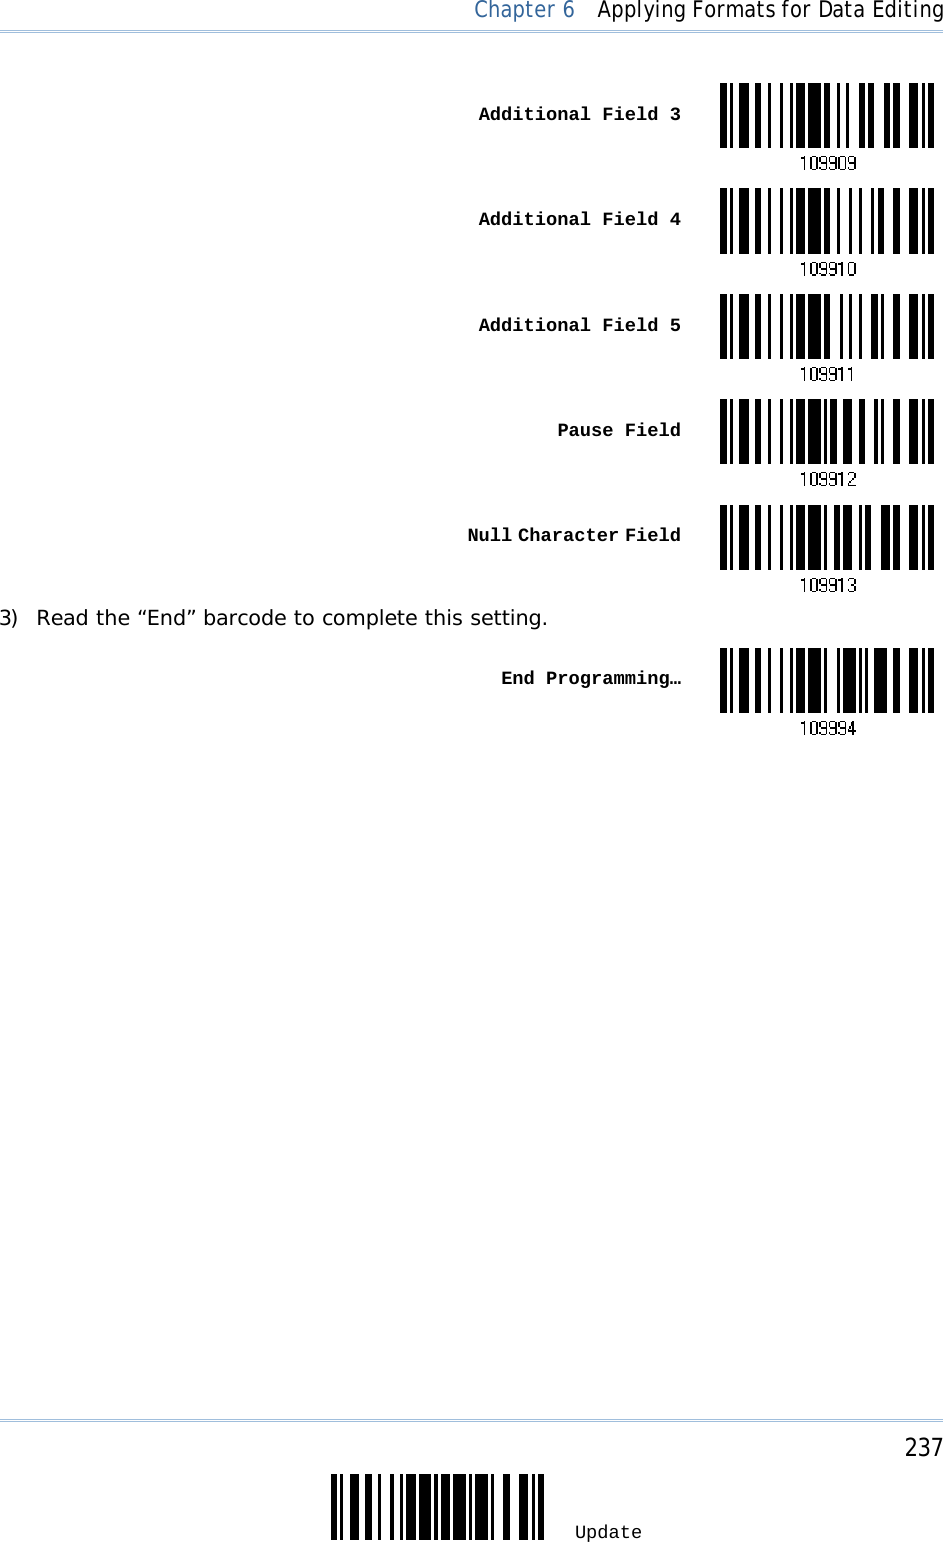     237 Update  Chapter 6  Applying Formats for Data Editing  Additional Field 3 Additional Field 4 Additional Field 5 Pause Field Null Character Field3) Read the “End” barcode to complete this setting.  End Programming…   